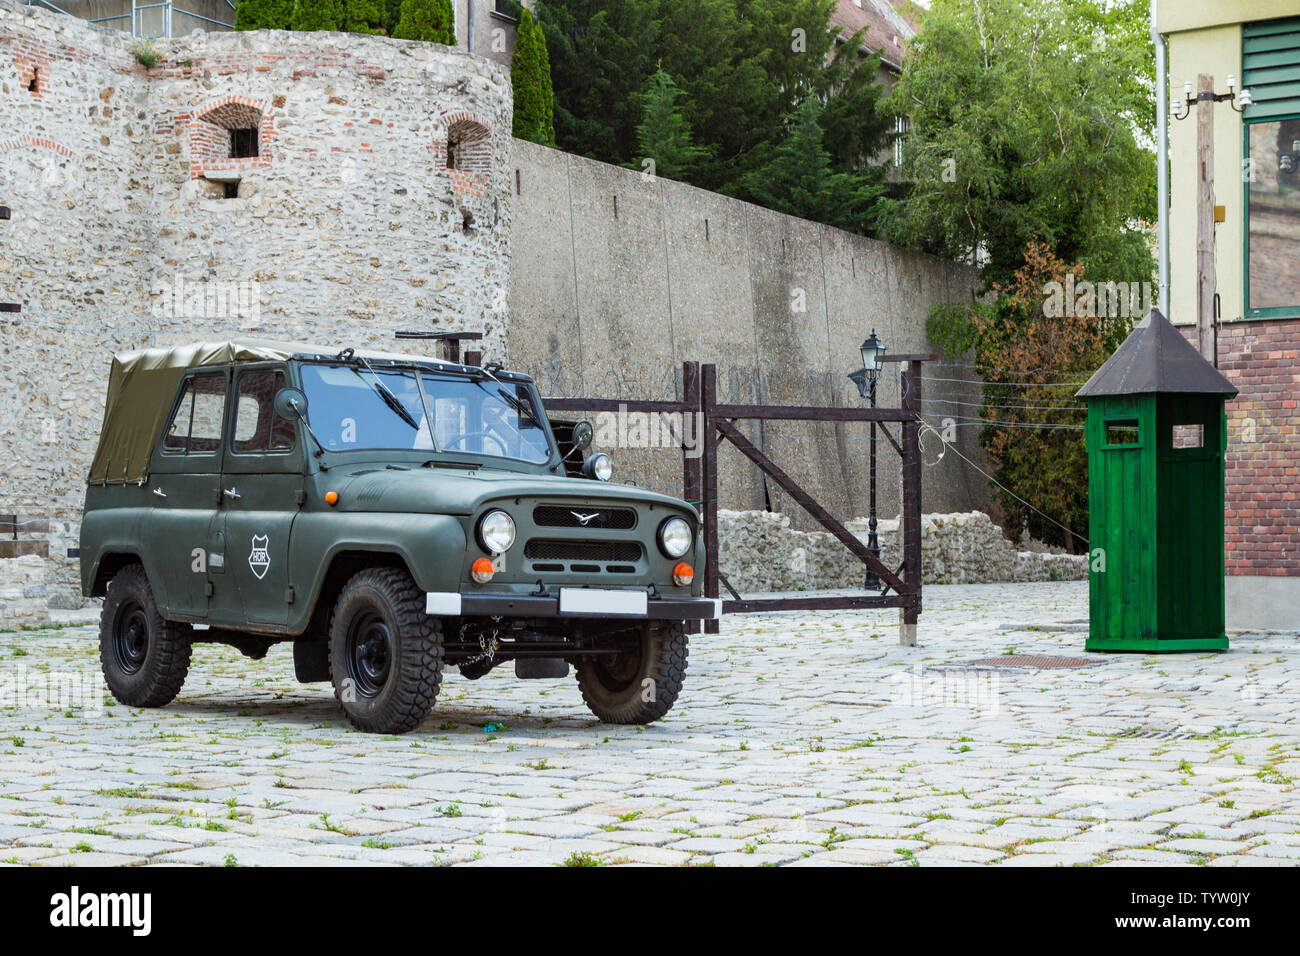 Street exhibition with UAZ-469 off-road vehicle and green guard booth in remembrance of Pan-European Picnic 1989, Sopron, Hungary Stock Photo